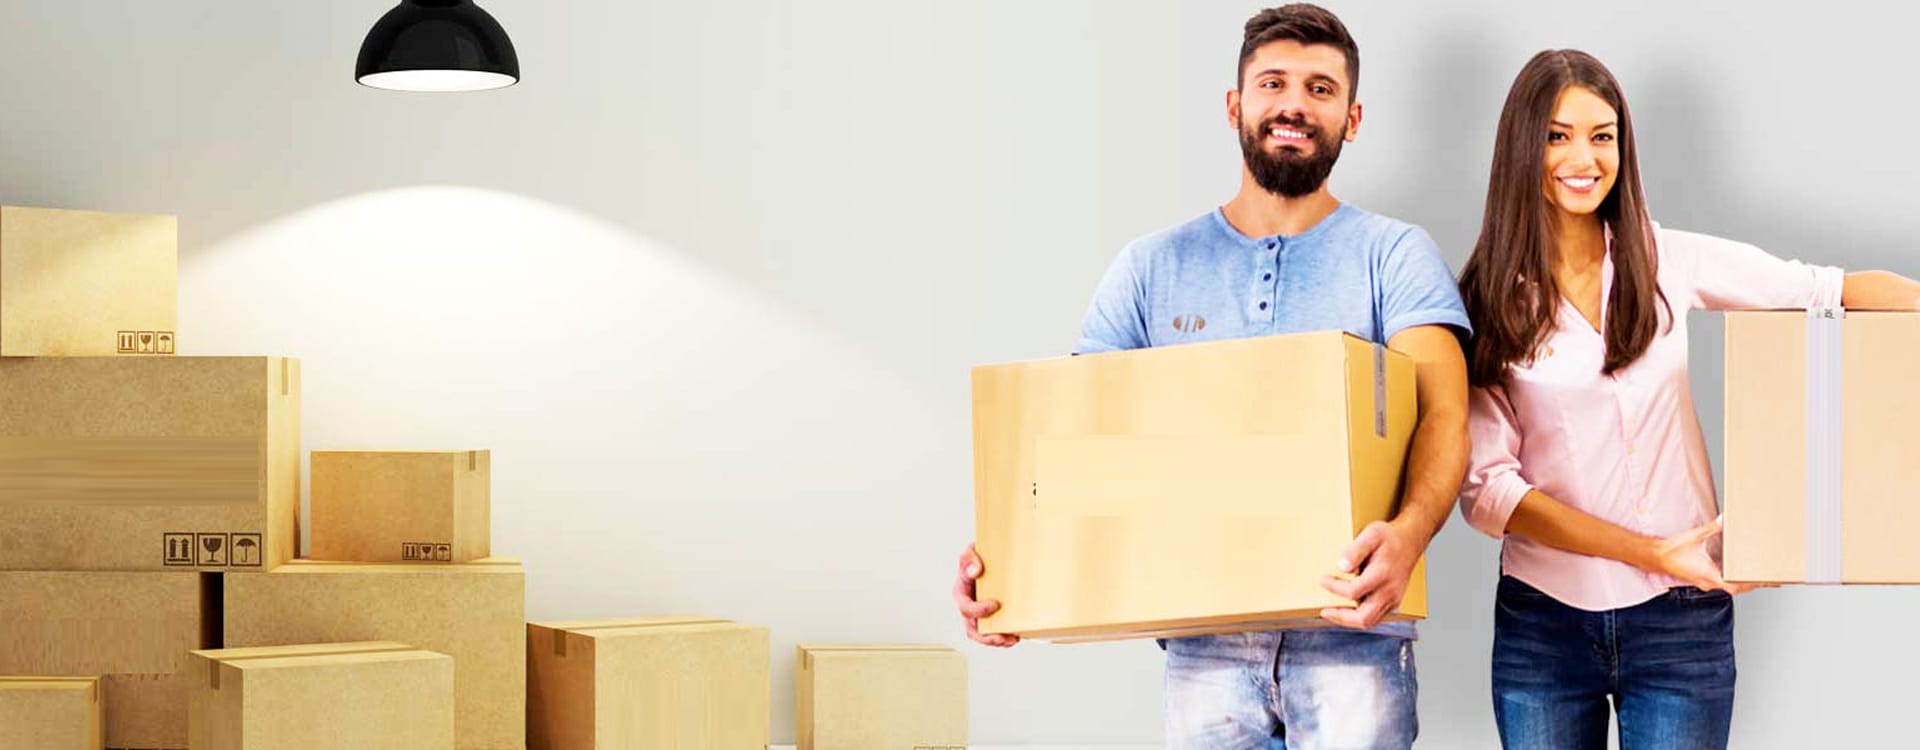 Packers and Movers in Mankhurd Mumbai